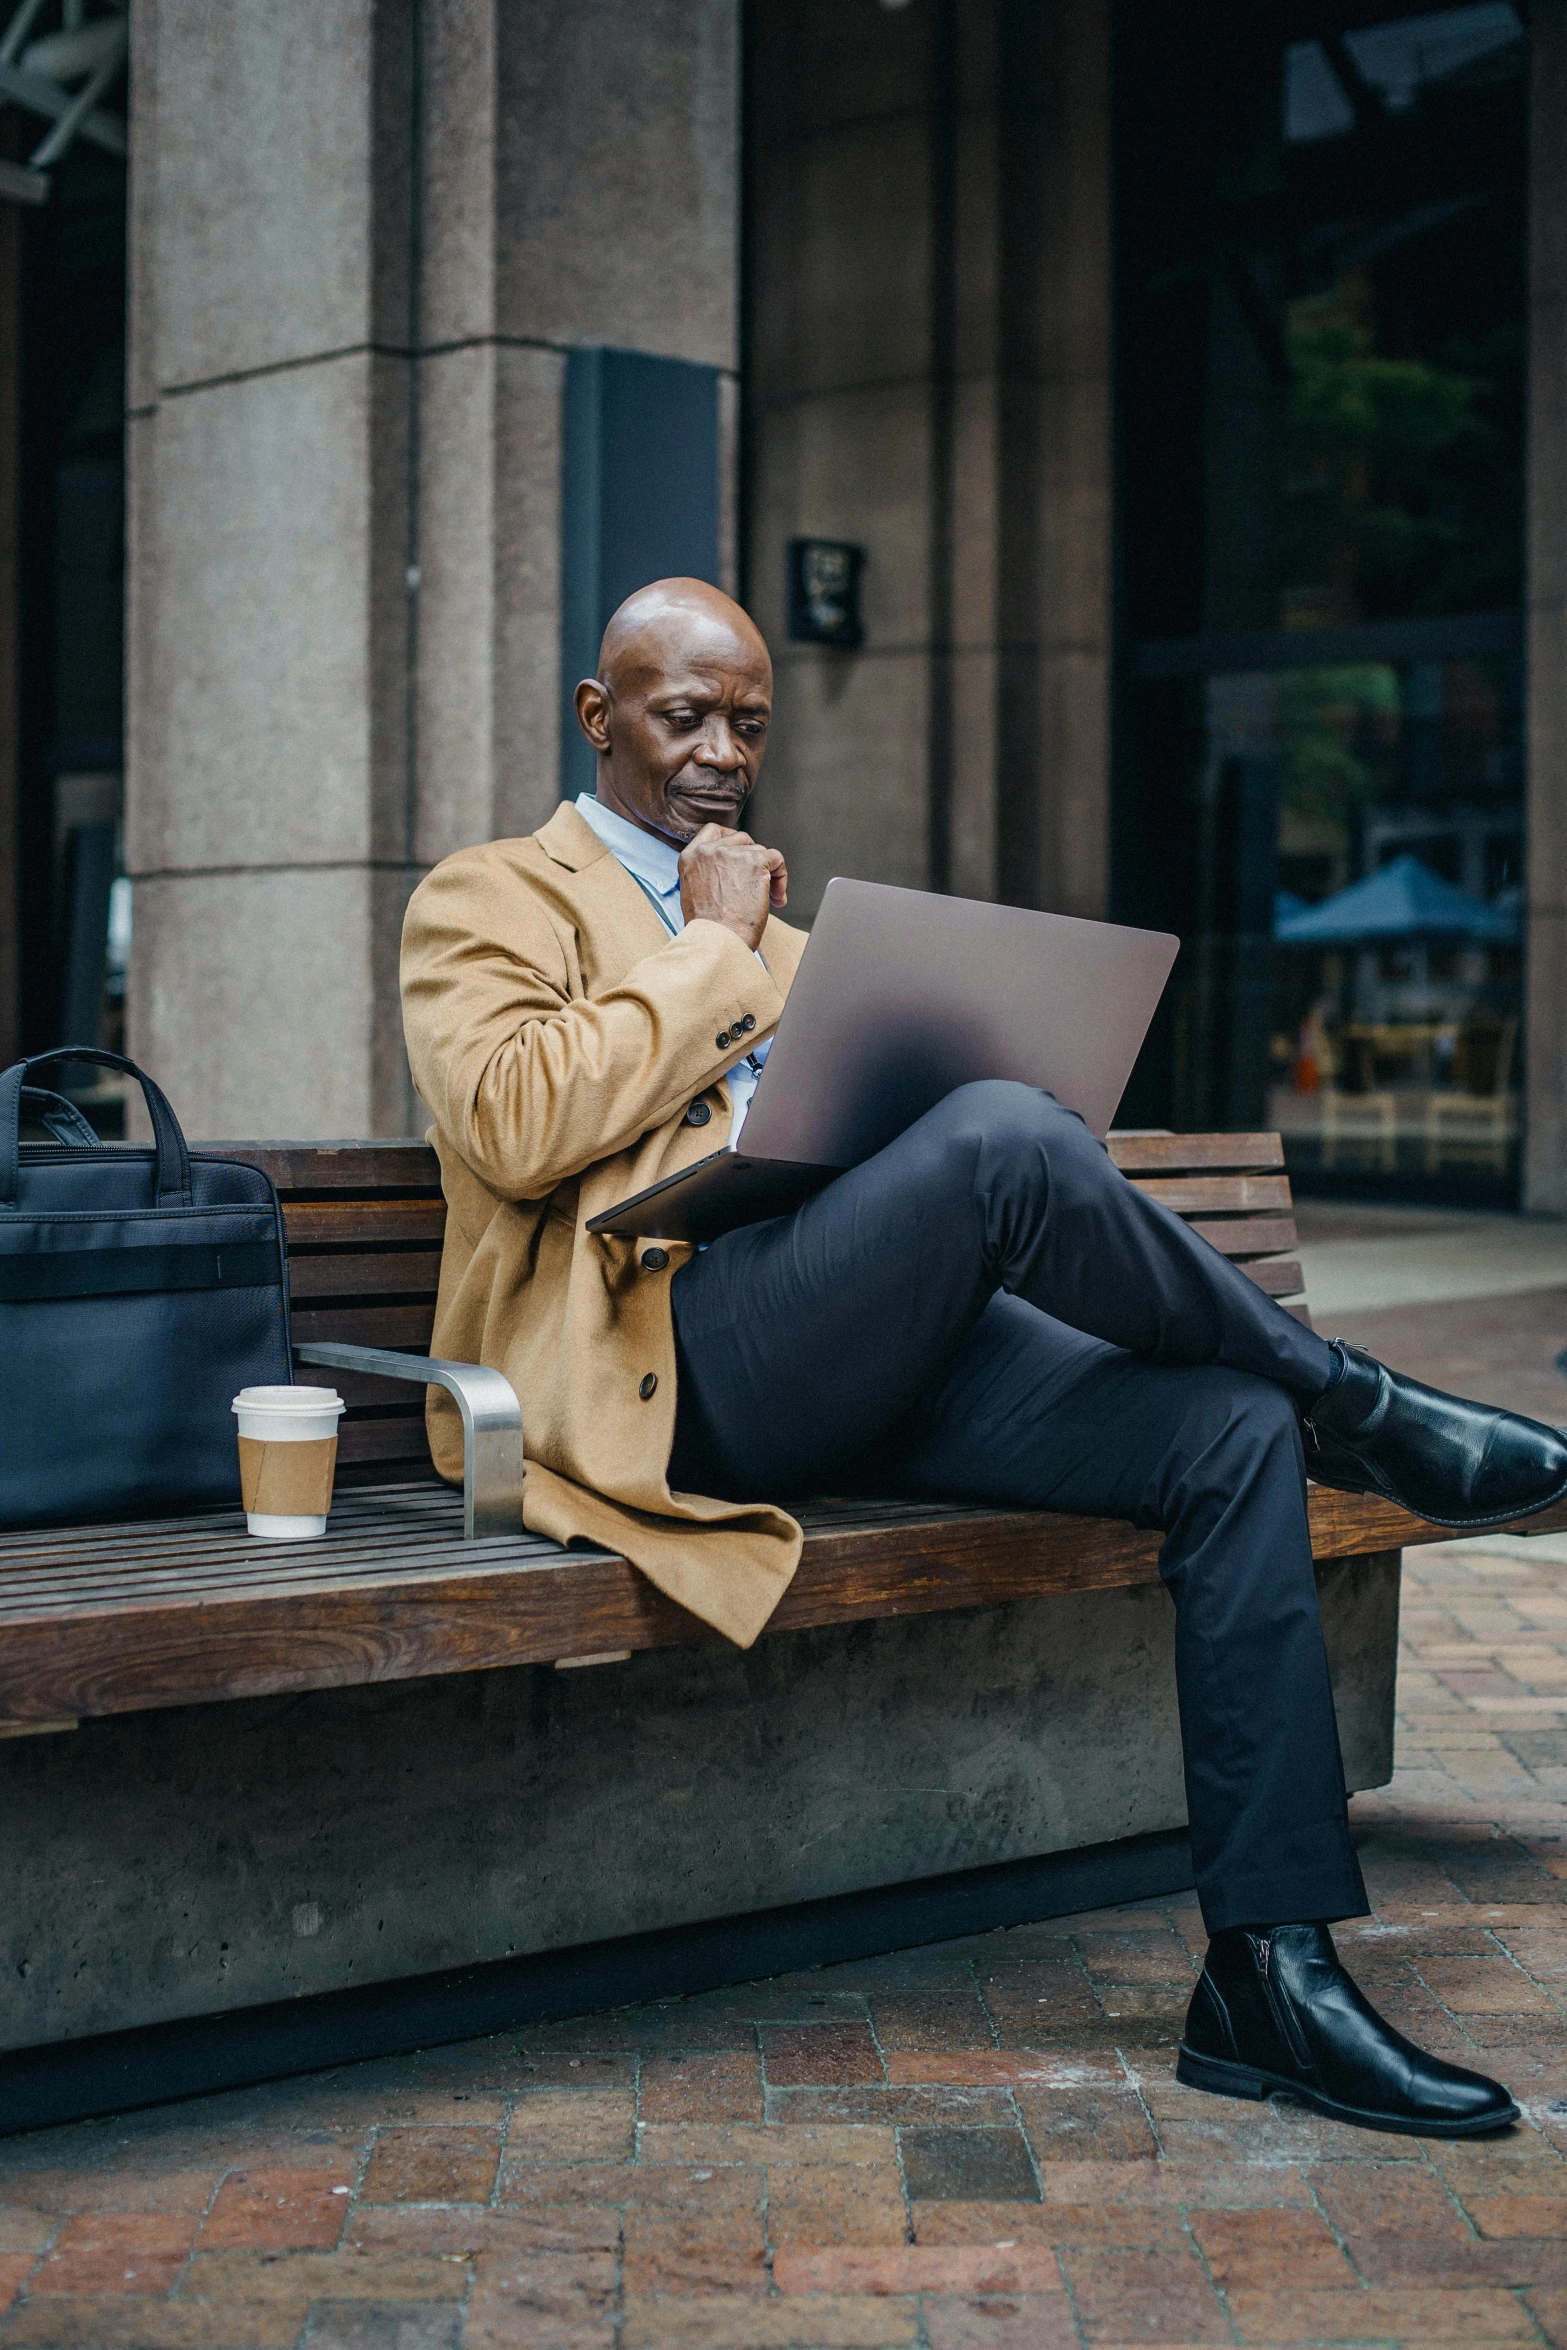 a man sitting on a bench with a laptop, trench coat and suit, black man, advanced economy, bald man